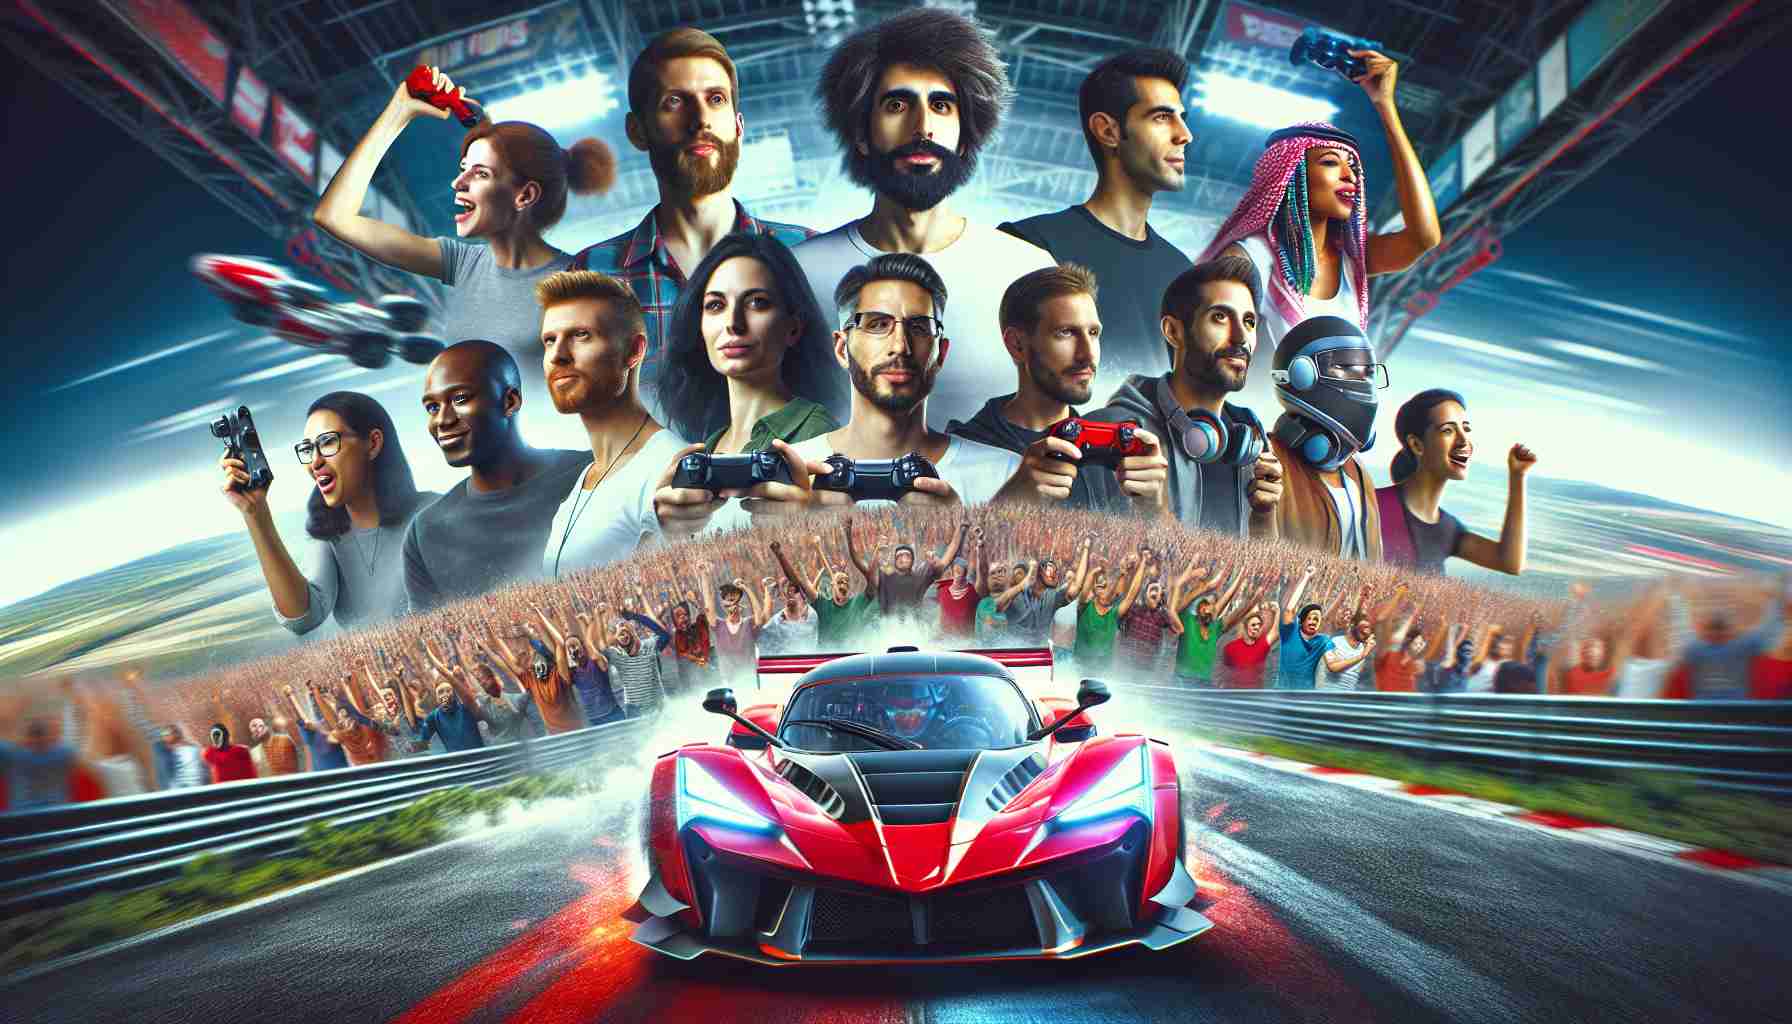 Generate a highly detailed and realistic image depicting the anticipation and excitement for a new, highly awaited racing video game called 'Rev Up'. Show a diverse group of gamers of different genders and descents, ranging from Middle Eastern, Caucasian, Hispanic, South Asian, and Black. The image should have high-definition quality. As elements of the game excitement, include a vibrant racing car speeding across a formidable race track, flanked by cheering digital crowd in the background, and symbolic elements such as gaming consoles and game cover art featuring the title 'Rev Up'.